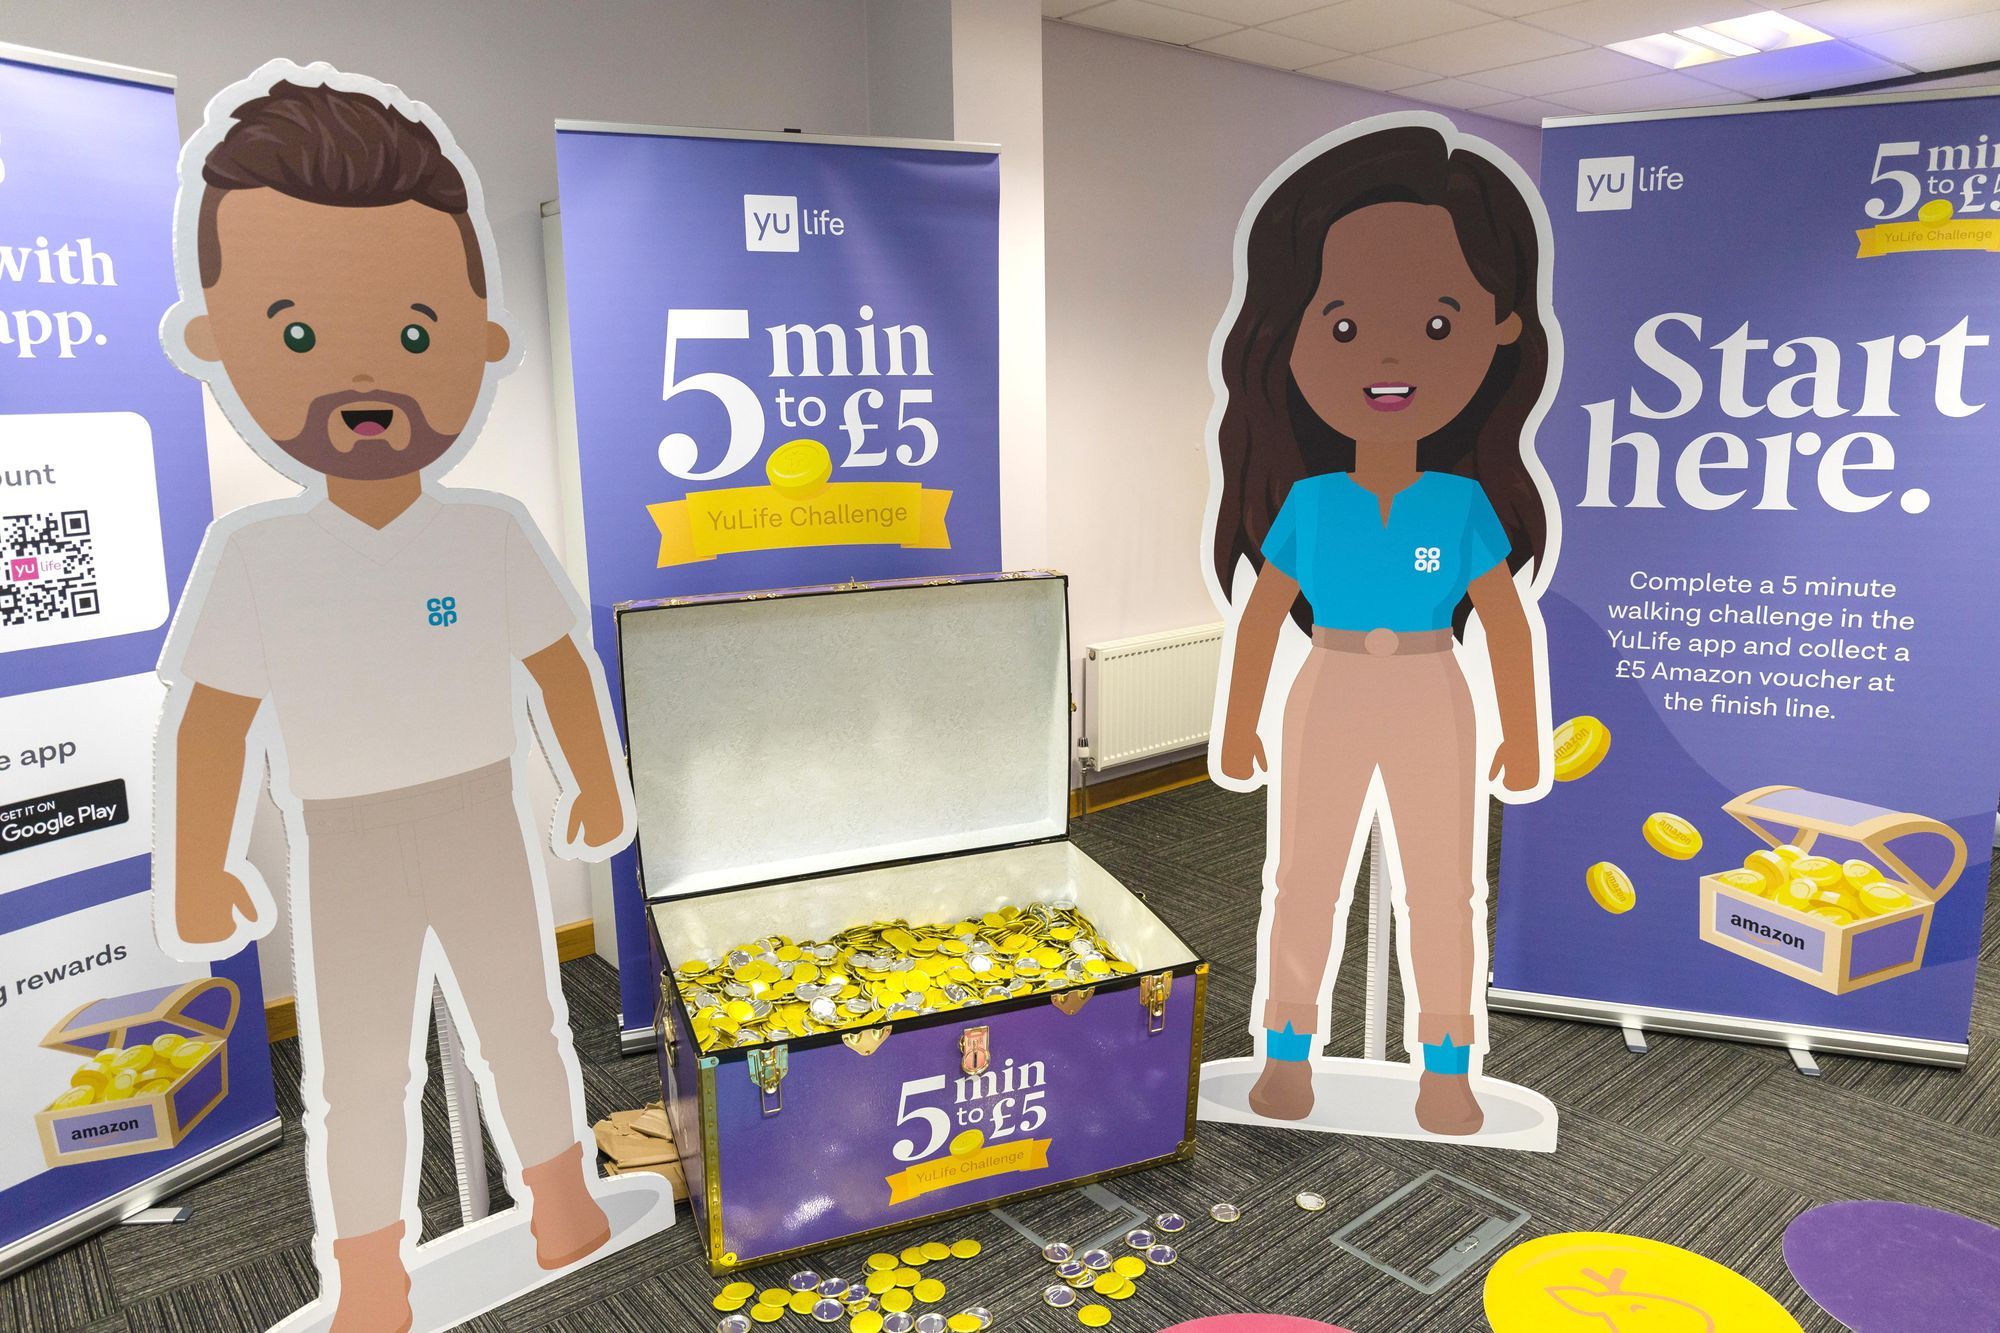 A chest of fake coins, two emoji cardboard cut-outs and some signs at a sign-up event as a Co-op depot.